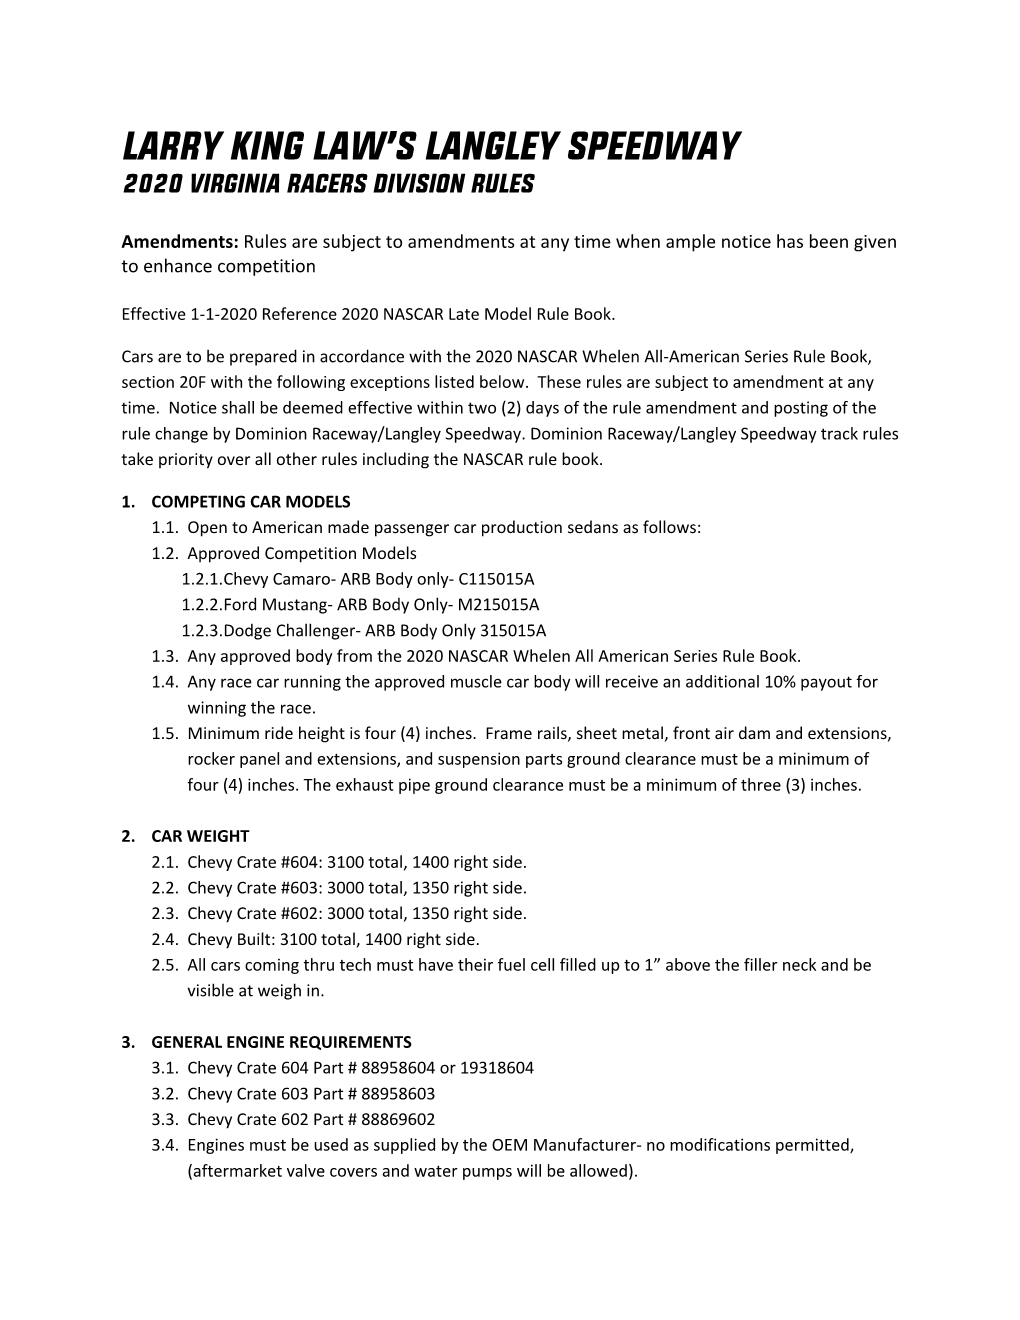 2020 Virginia Racers Division Rules